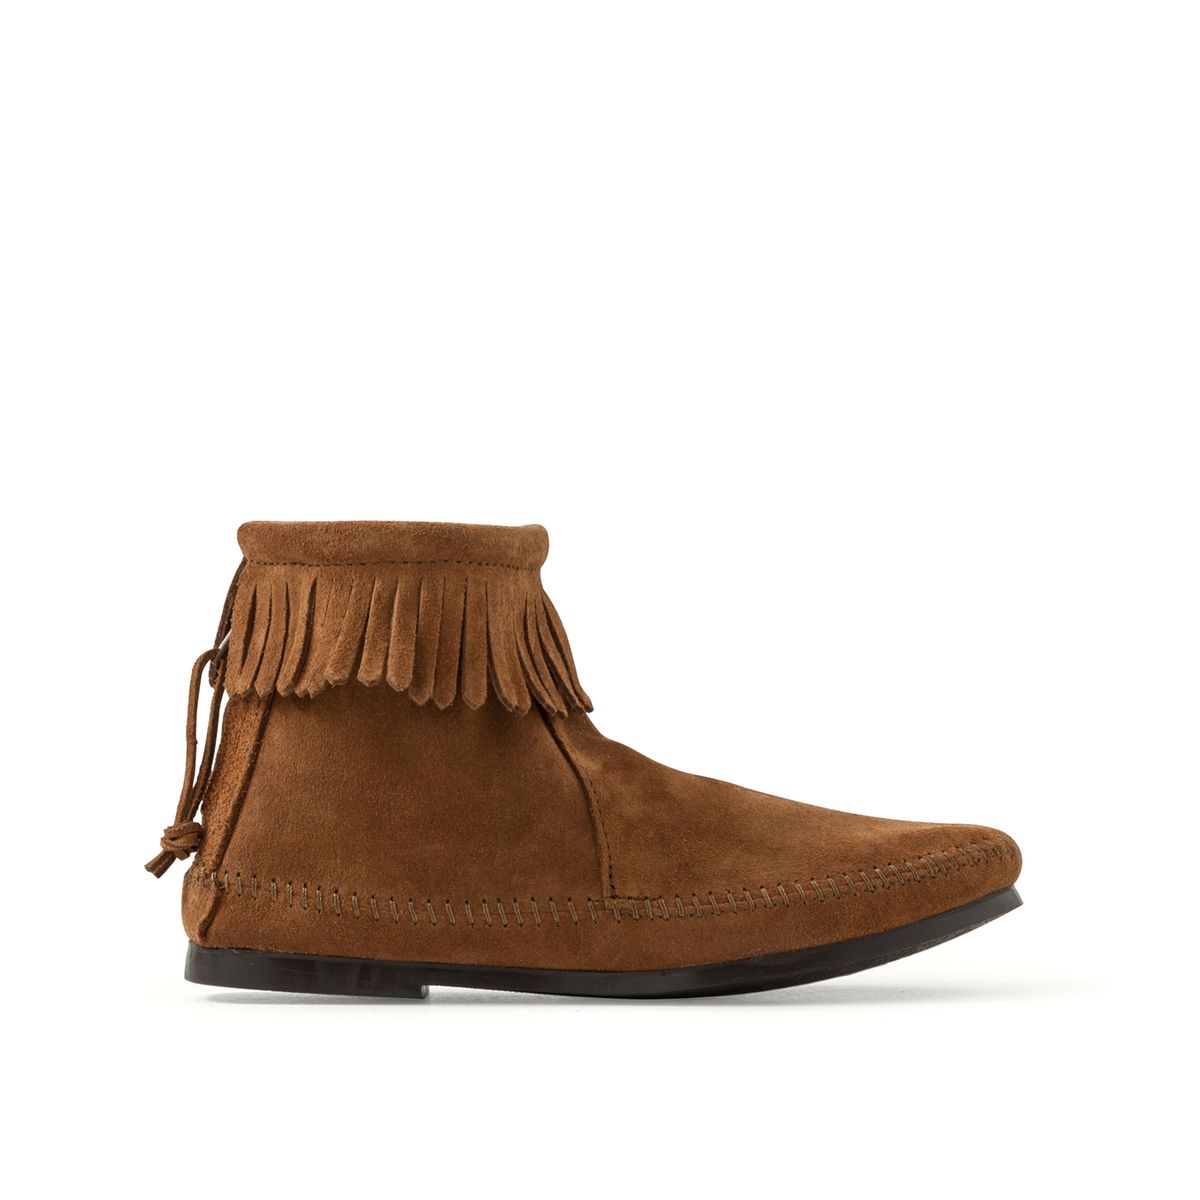 Boots franges, cuir suede